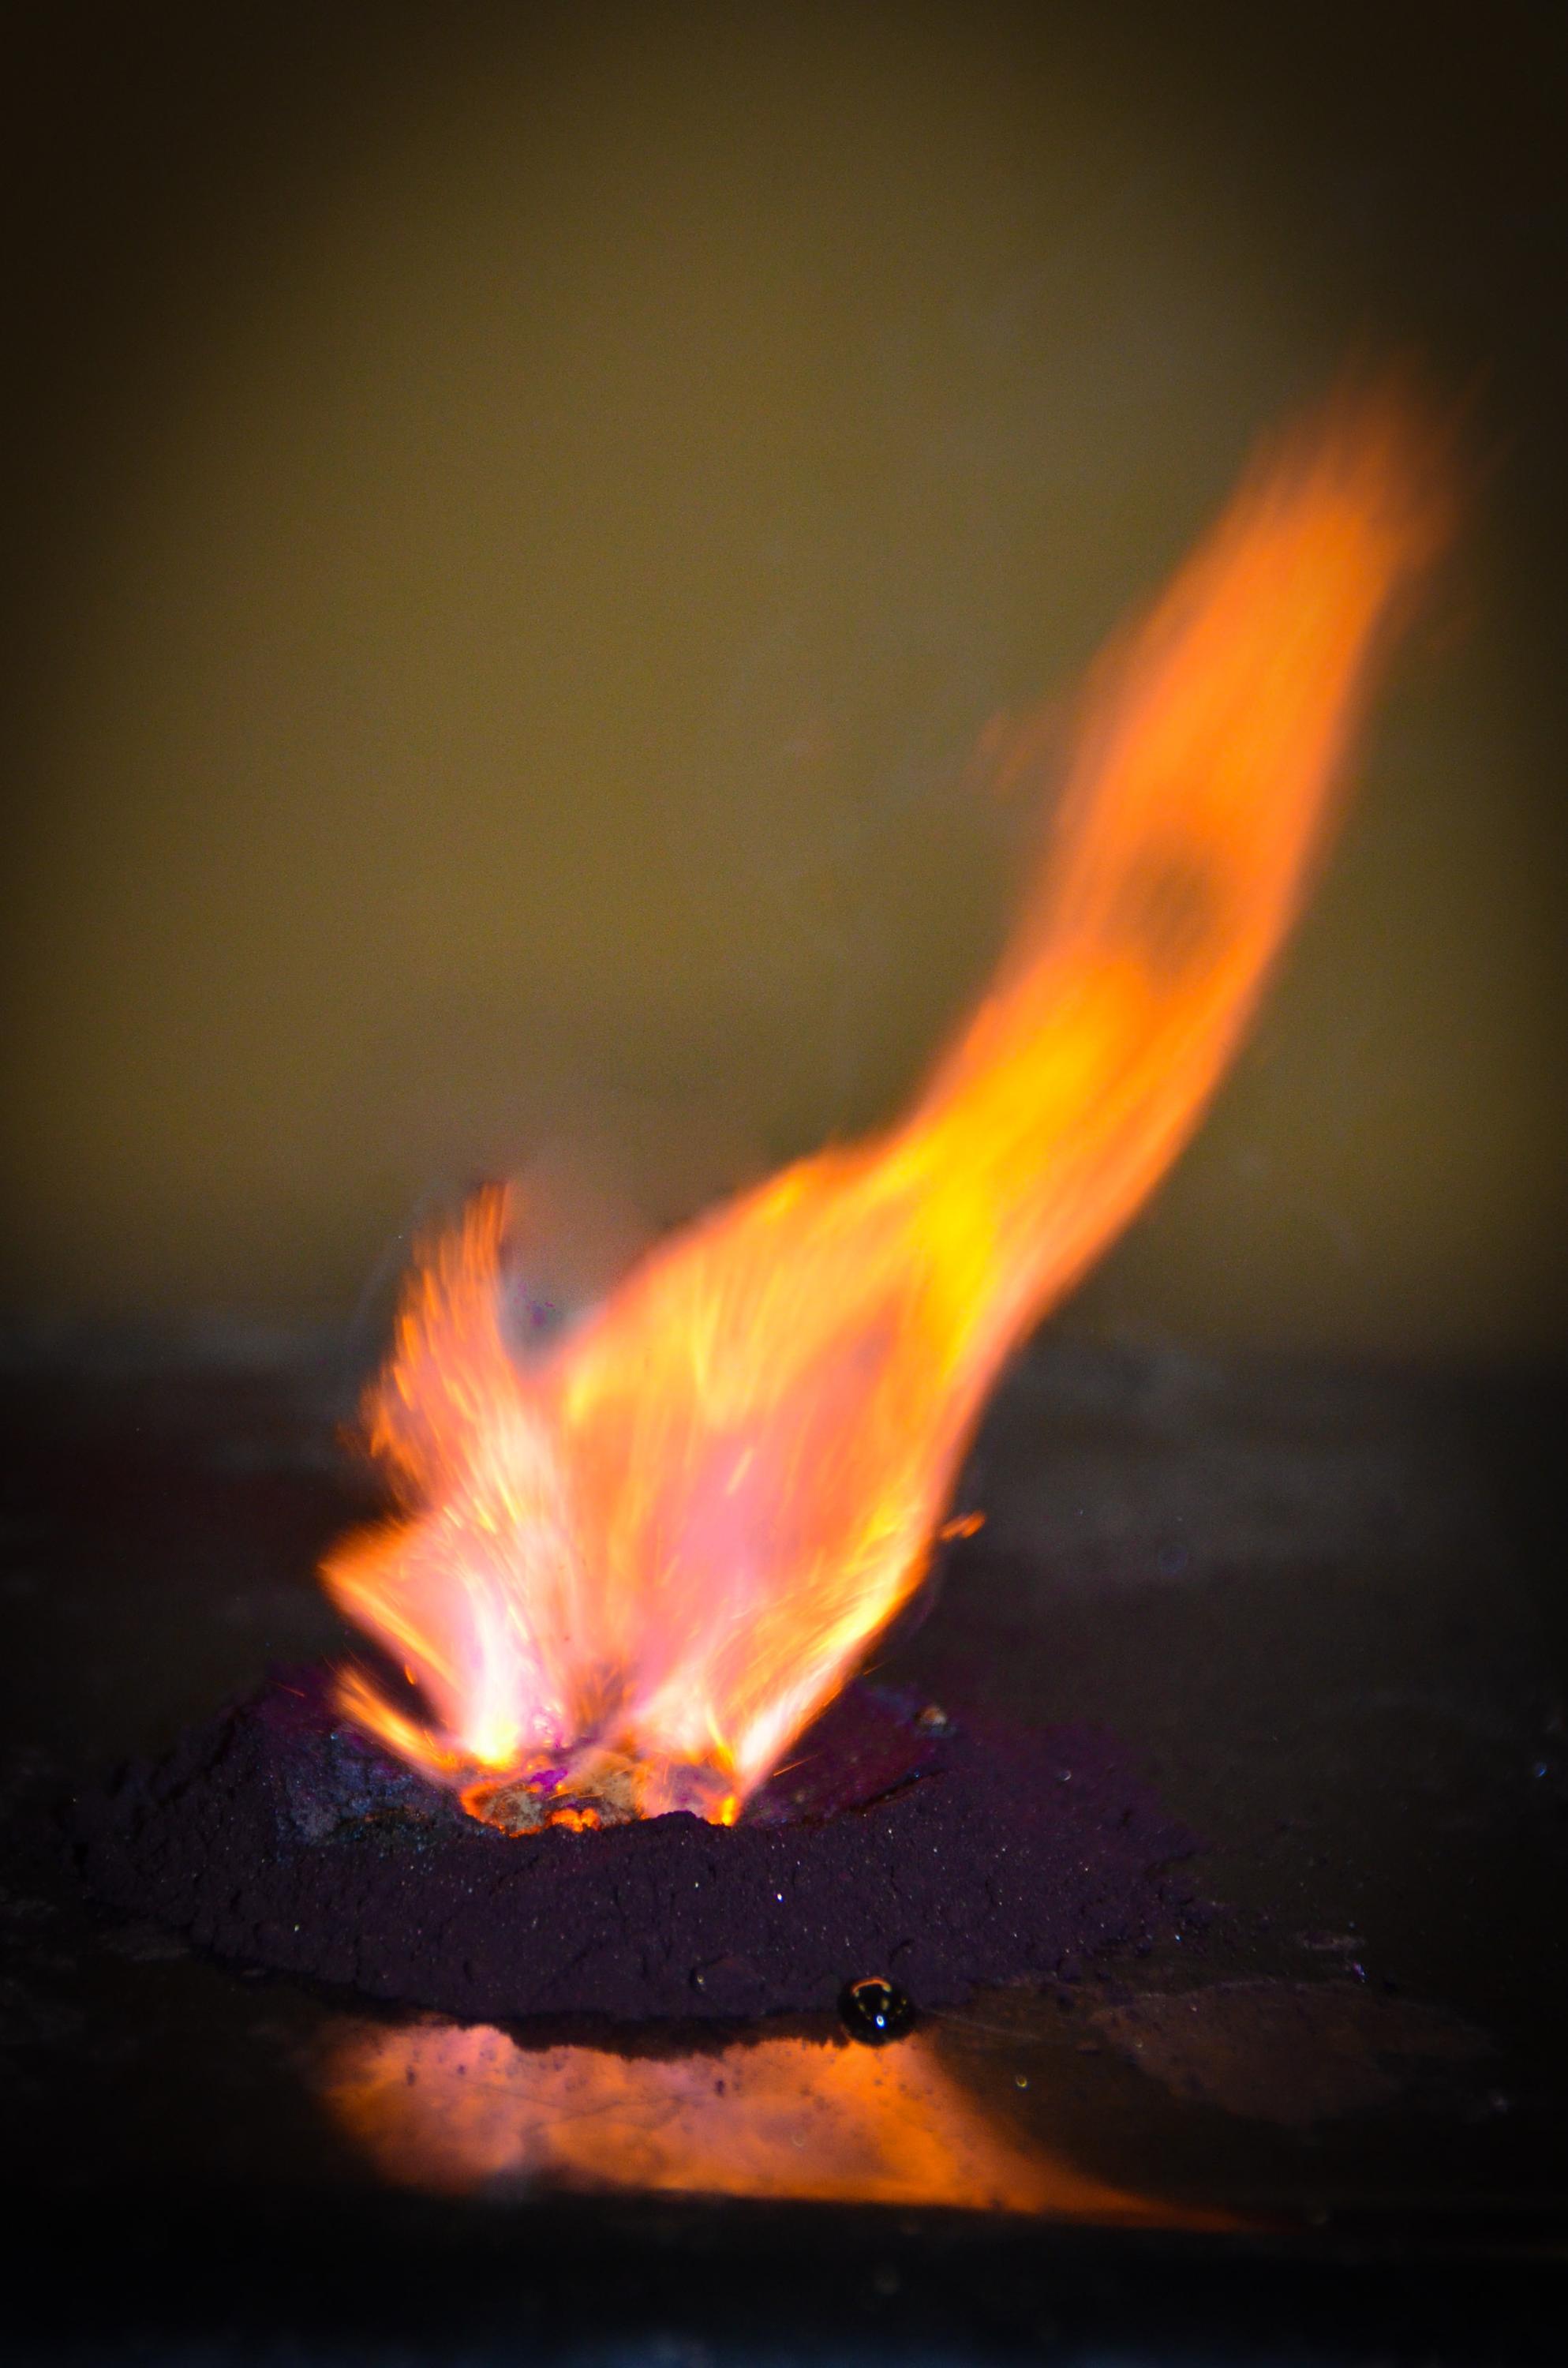 medium-sized orange flame coming out a small pile of grey powder